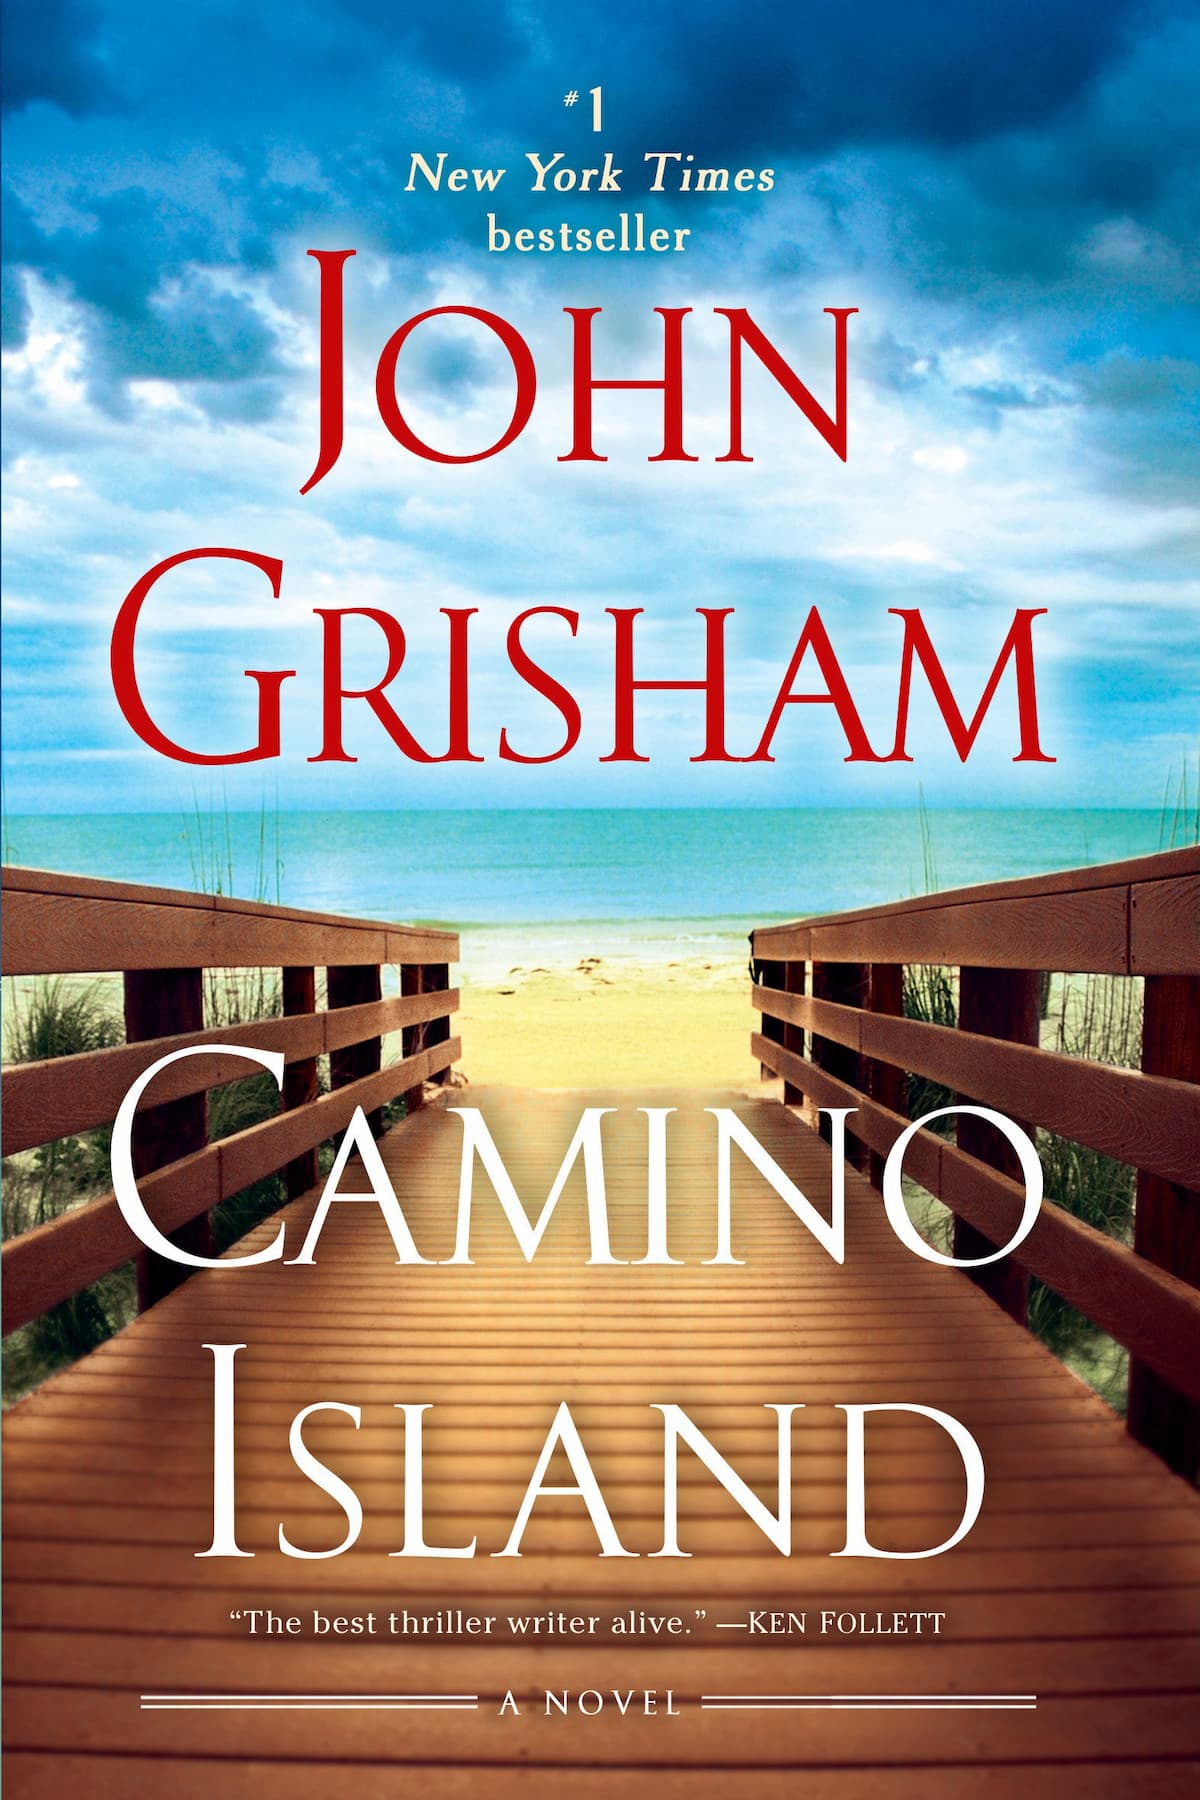 Camino Island - John Grisham (Camino Island Series Book 1) can be a great help to those who seek to recharge their energy levels during the holidays.